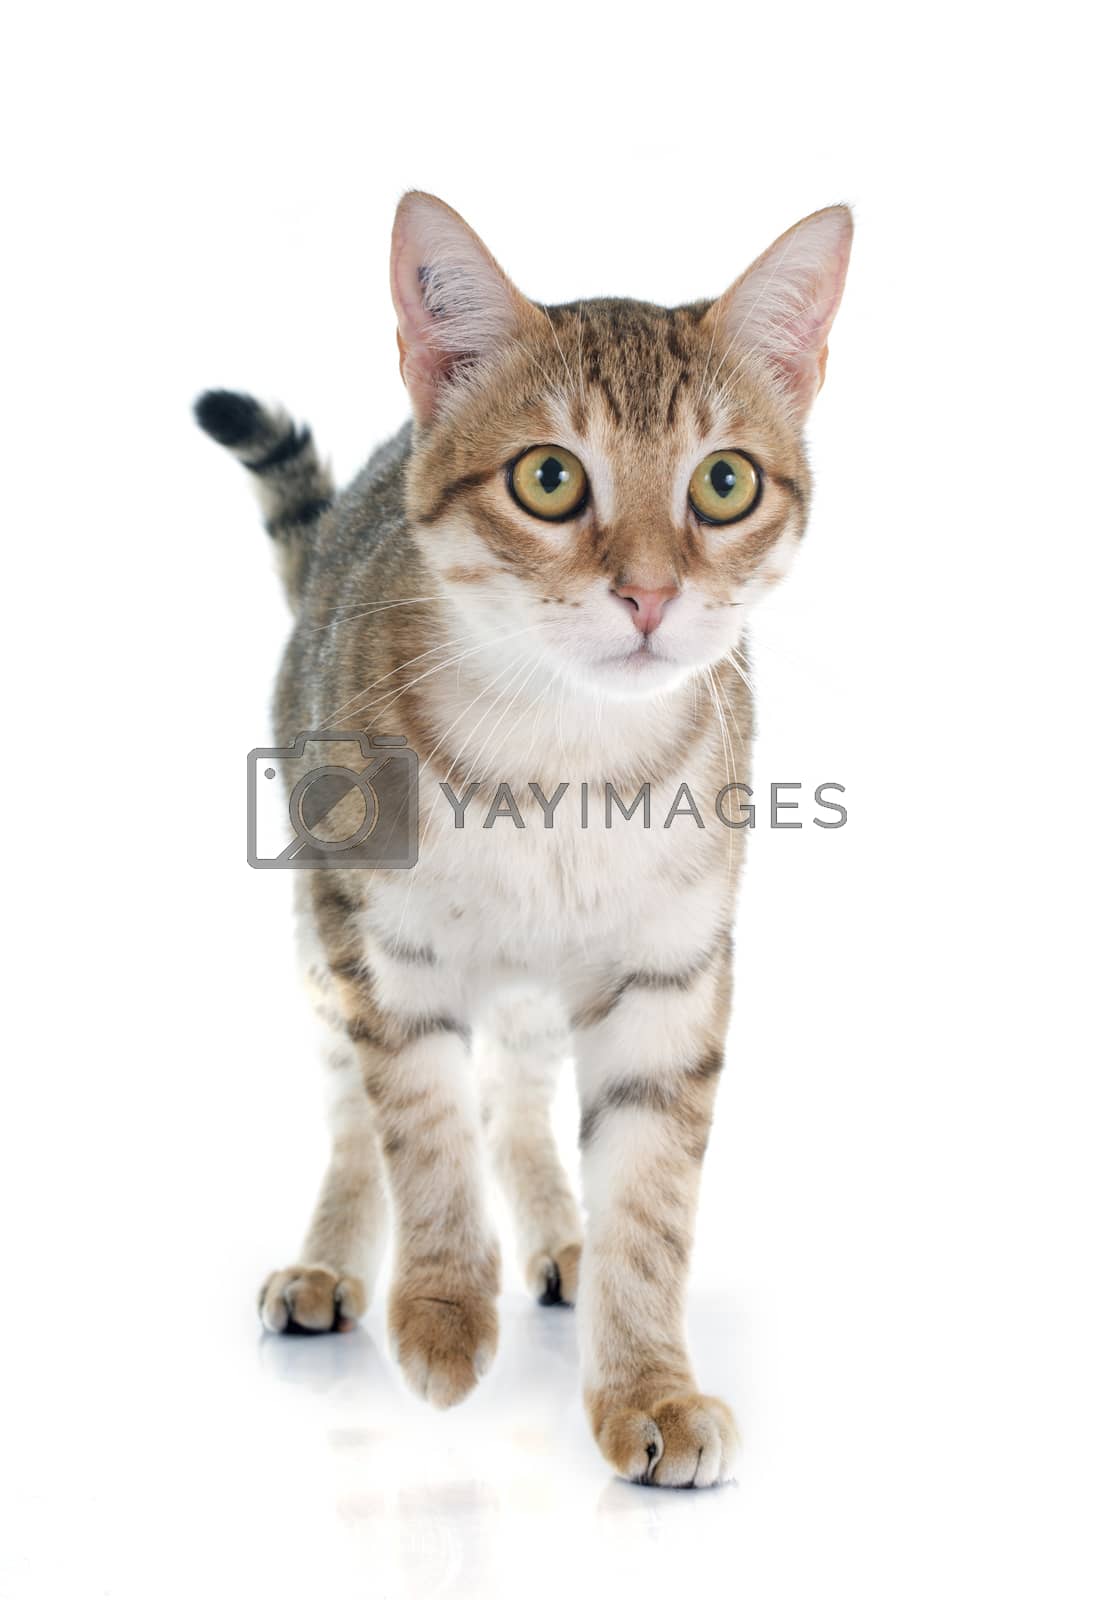 Royalty free image of tabby cat by cynoclub